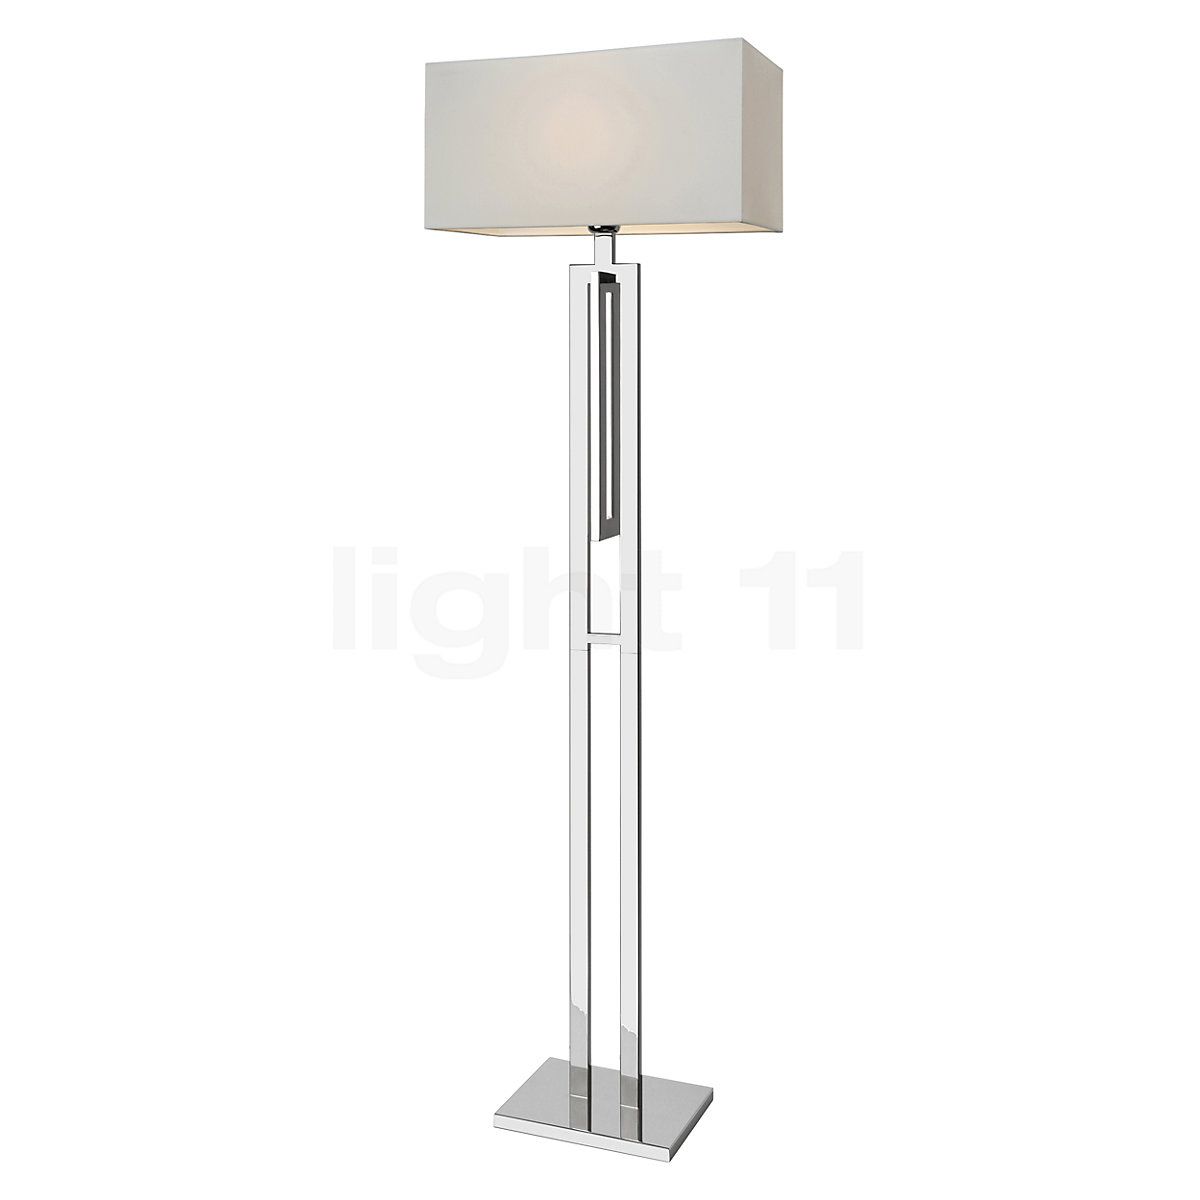 Buy Sompex City Floor Lamp At Light11.eu Throughout Stainless Steel Floor Lamps (Photo 3 of 15)